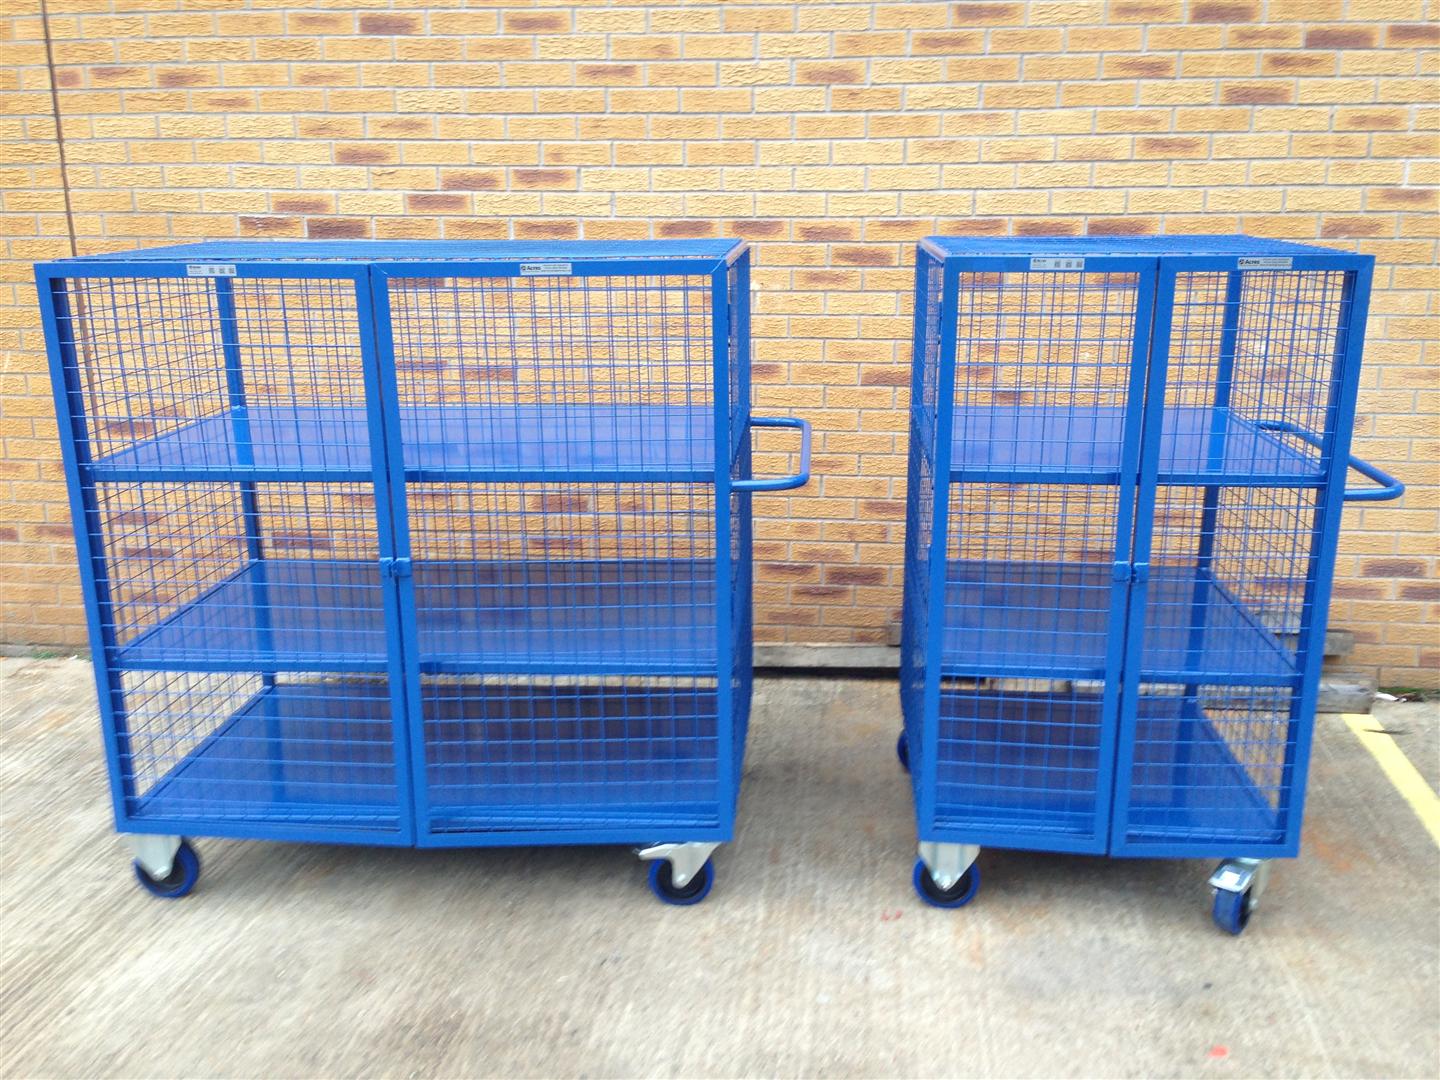 AD-253-2013-09 – Lifting Block Cages